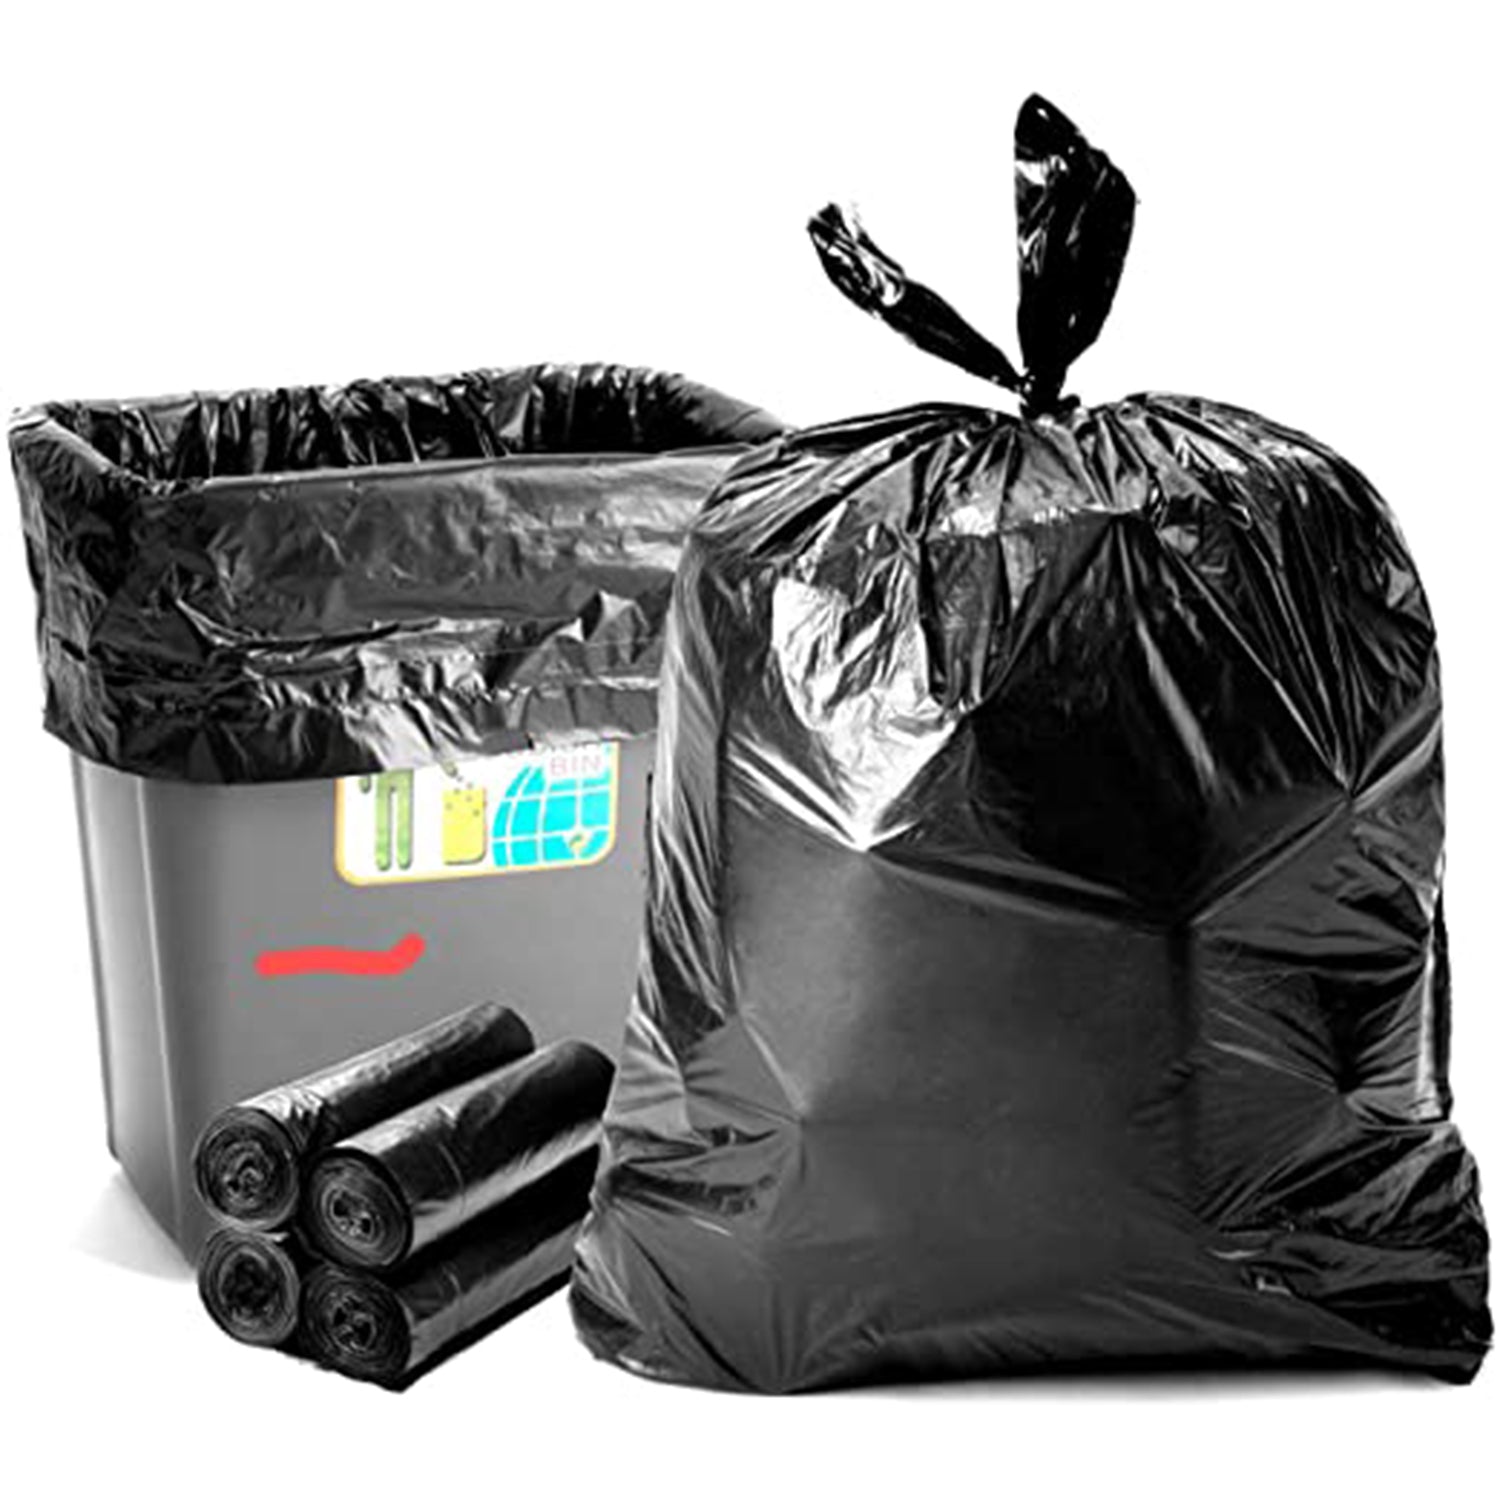 What are the Benefits of Using Recyclable Contractor Bags - Haultail  On-Demand Delivery Network